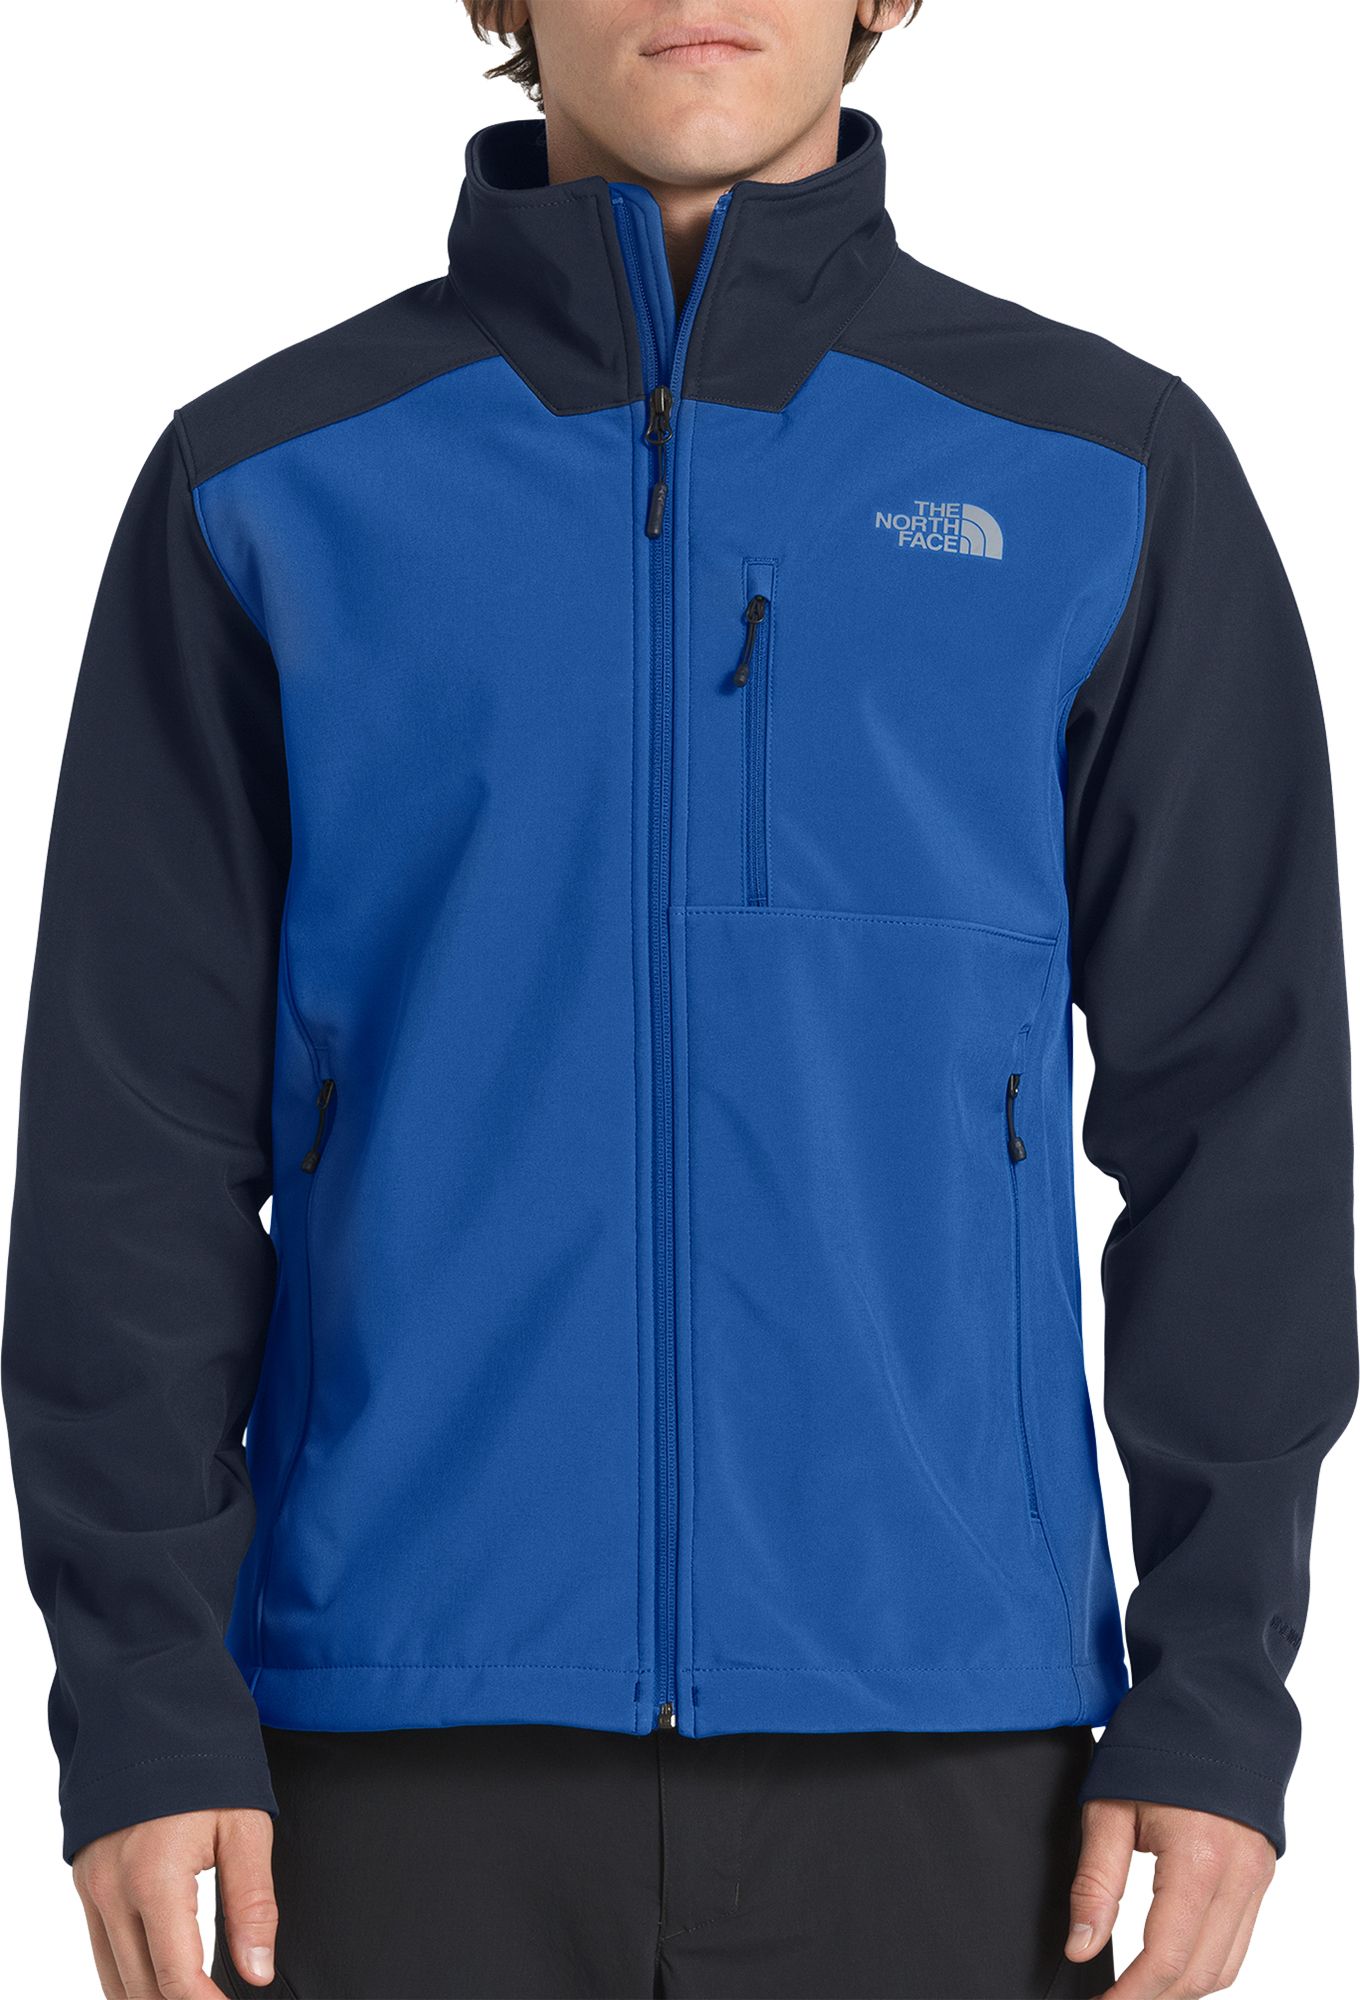 north face men's apex bionic 2 hooded soft shell jacket